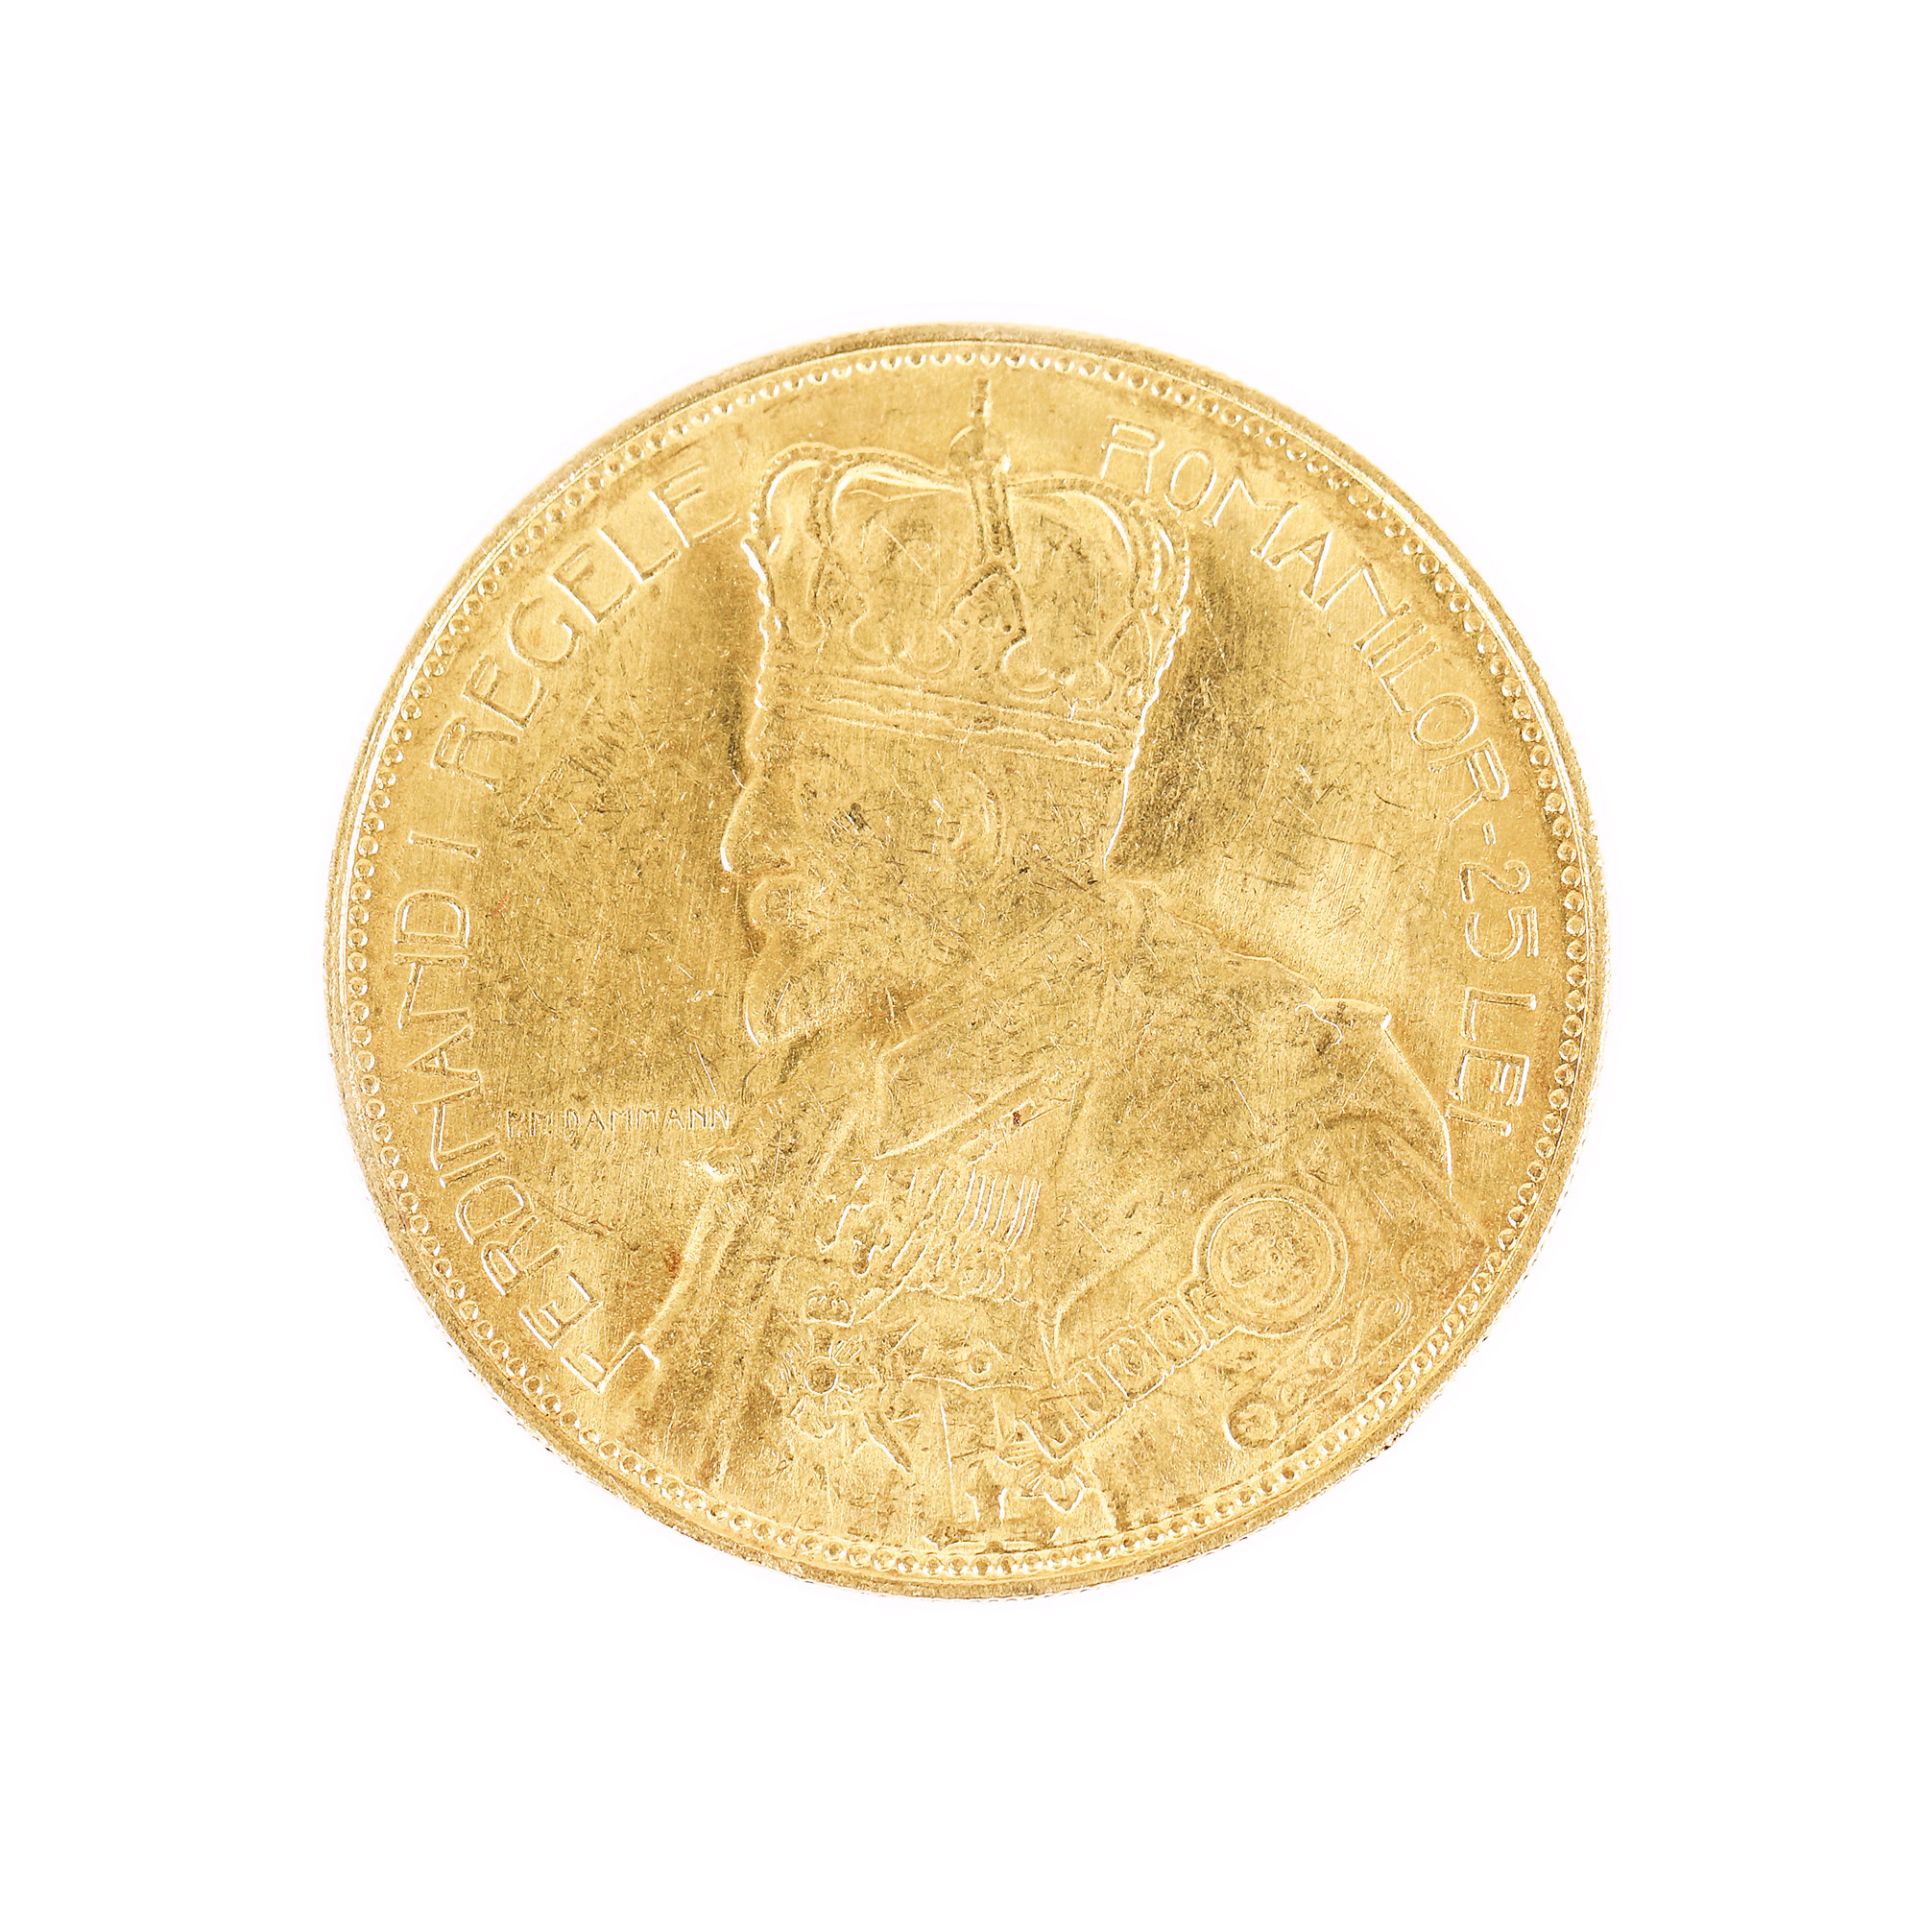 25 Lei 1922 coin, gold - Image 2 of 3